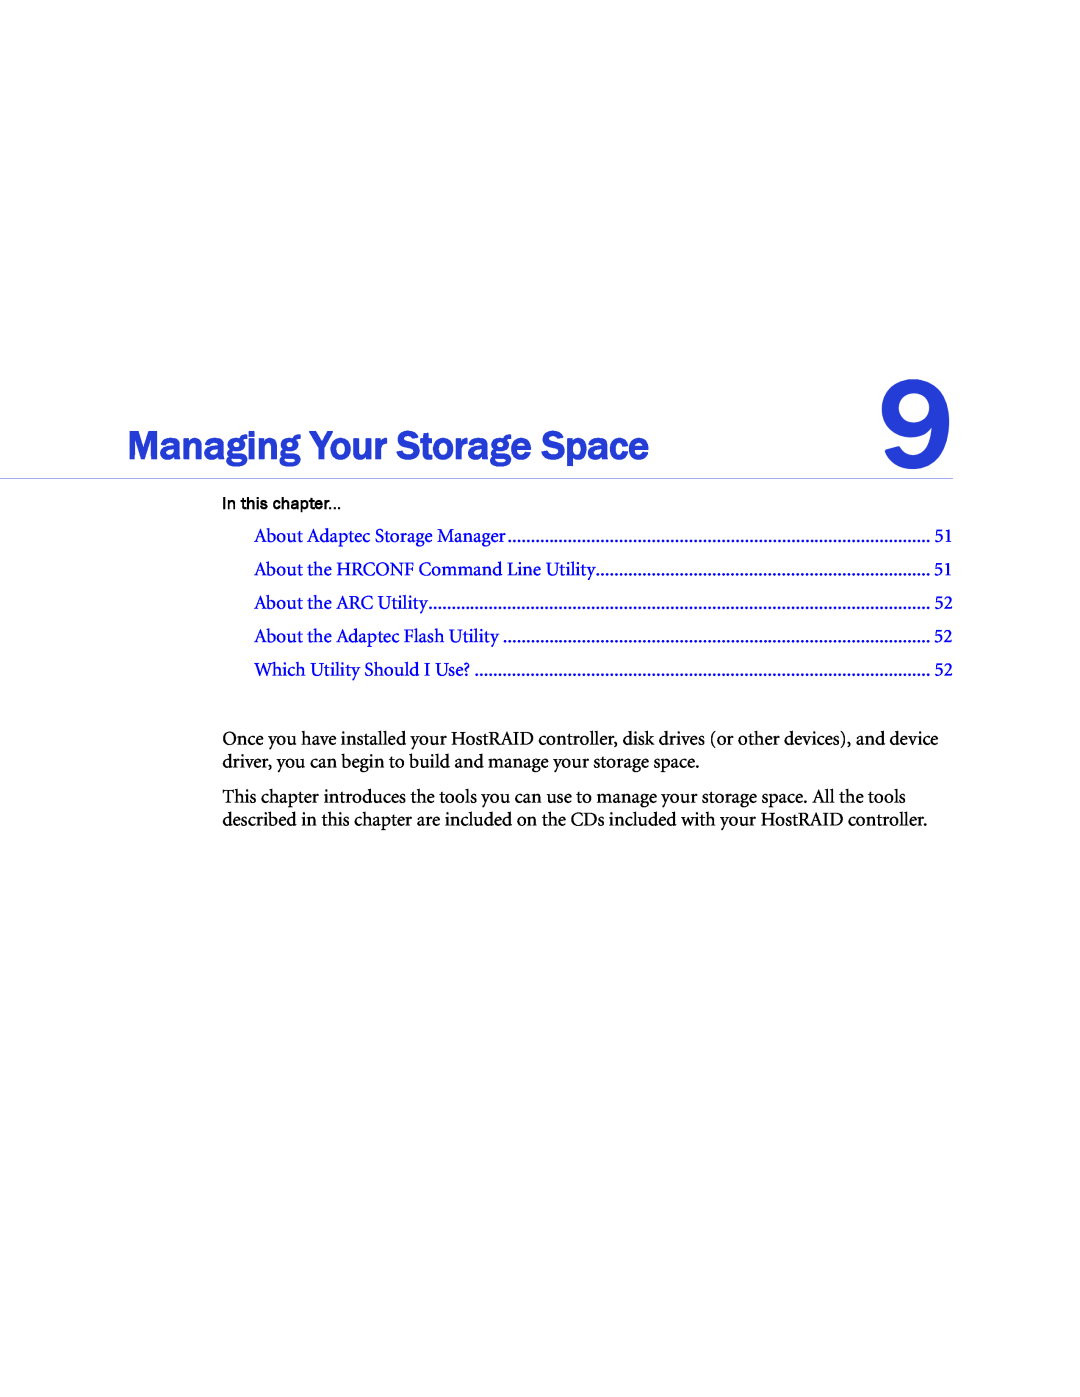 Adaptec 58300, 44300 Managing Your Storage Space, About Adaptec Storage Manager, About the HRCONF Command Line Utility 